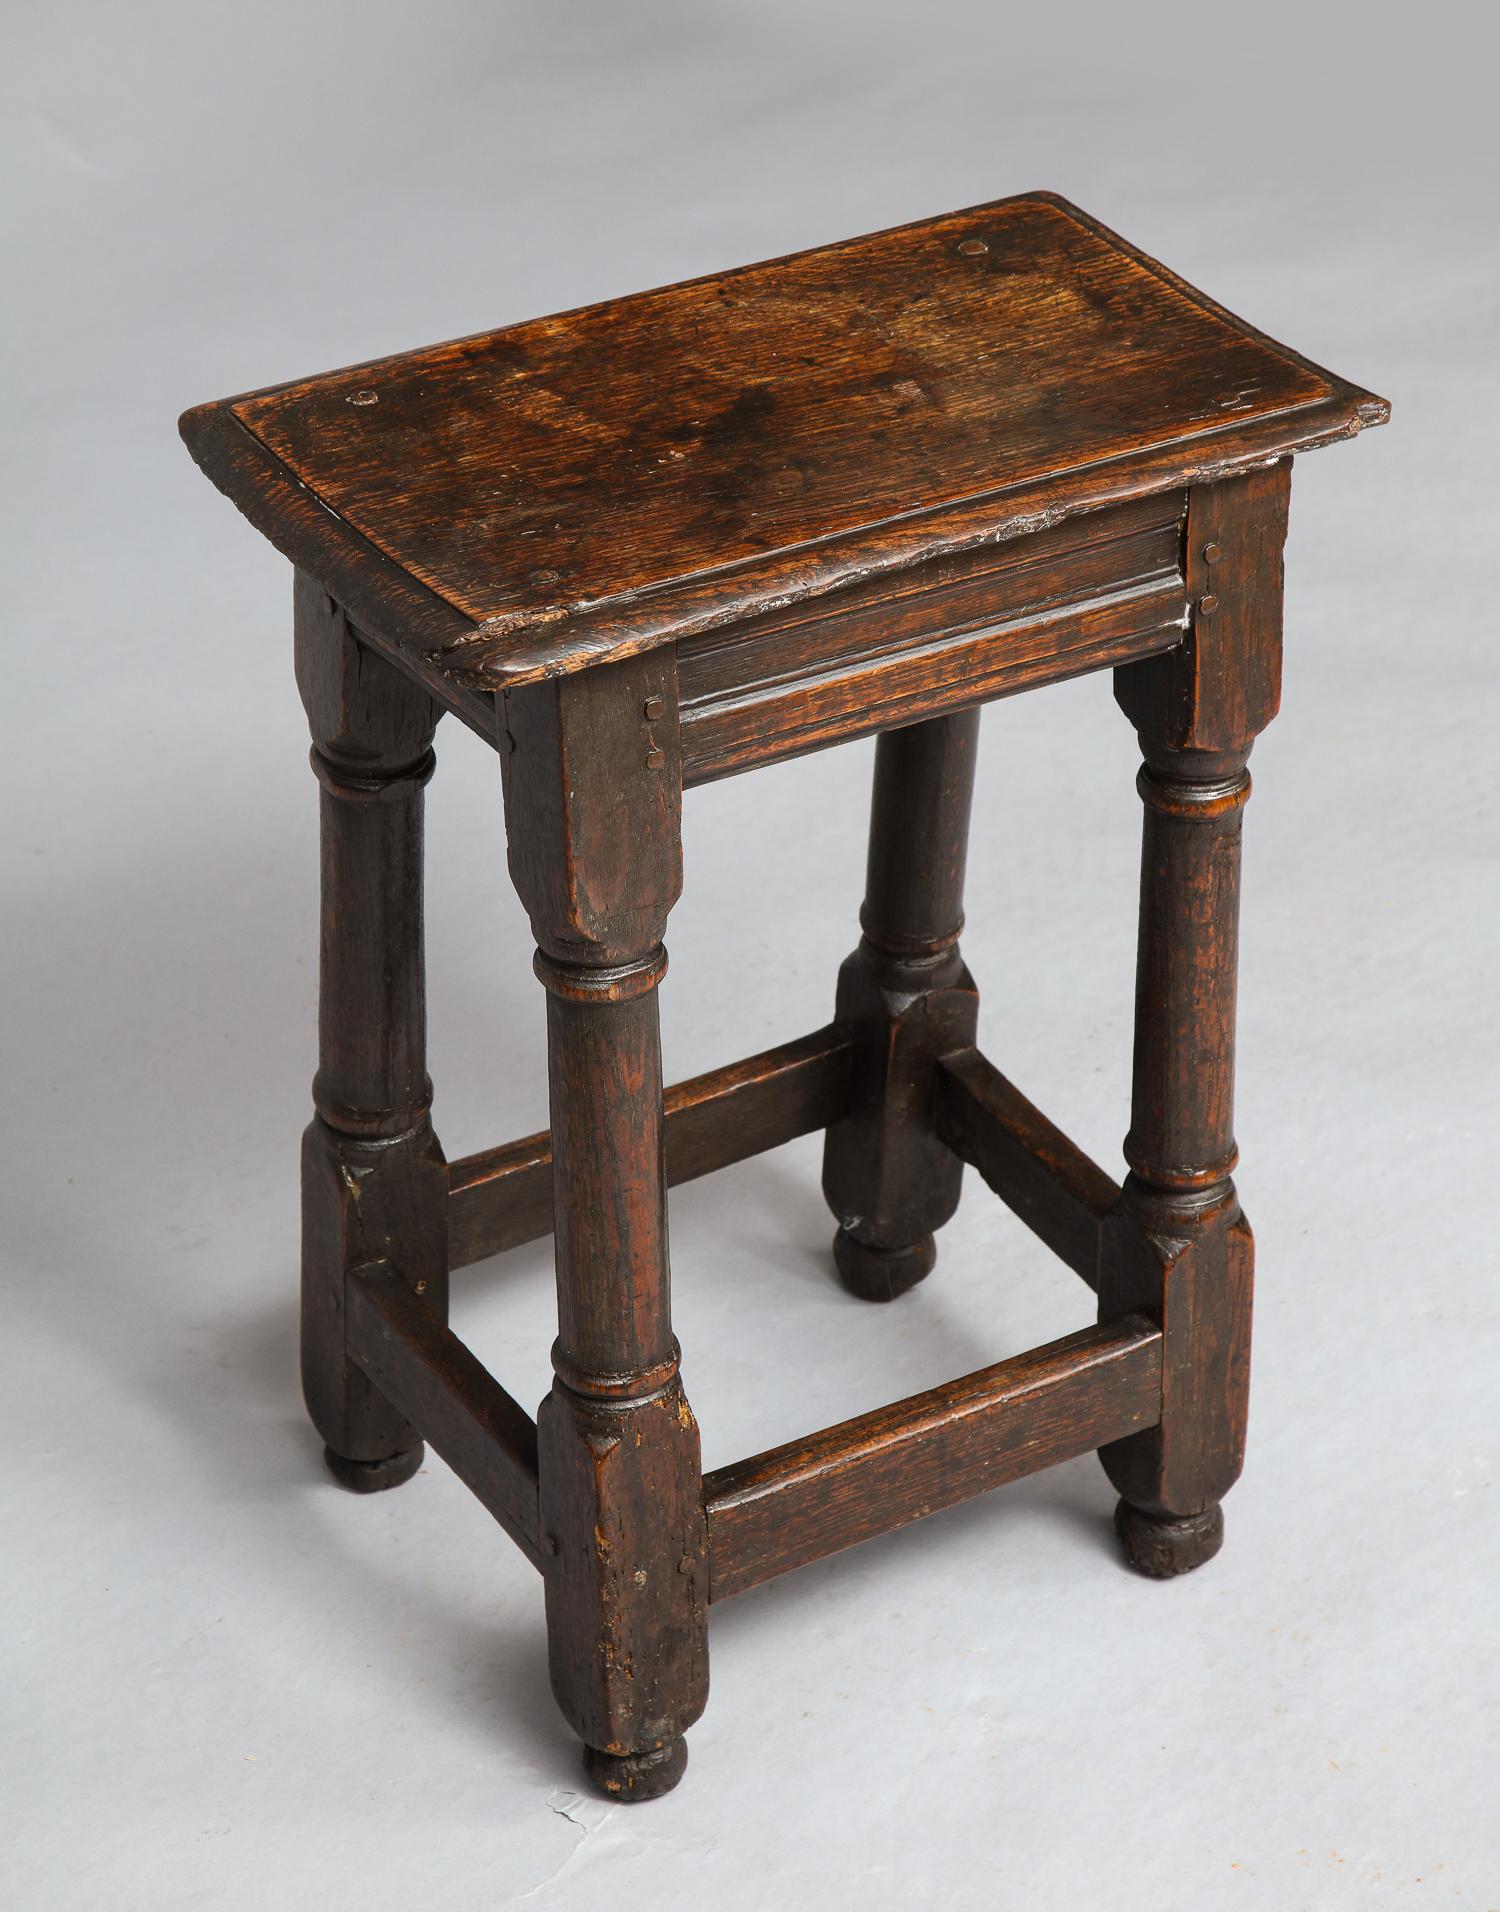 Fine mid-17th century English oak joint stool, having a single plank thumb molded top over channel molded aprons, standing on slightly splayed balustrade turned legs joined by box stretcher and standing on original ball feet, the whole possessing